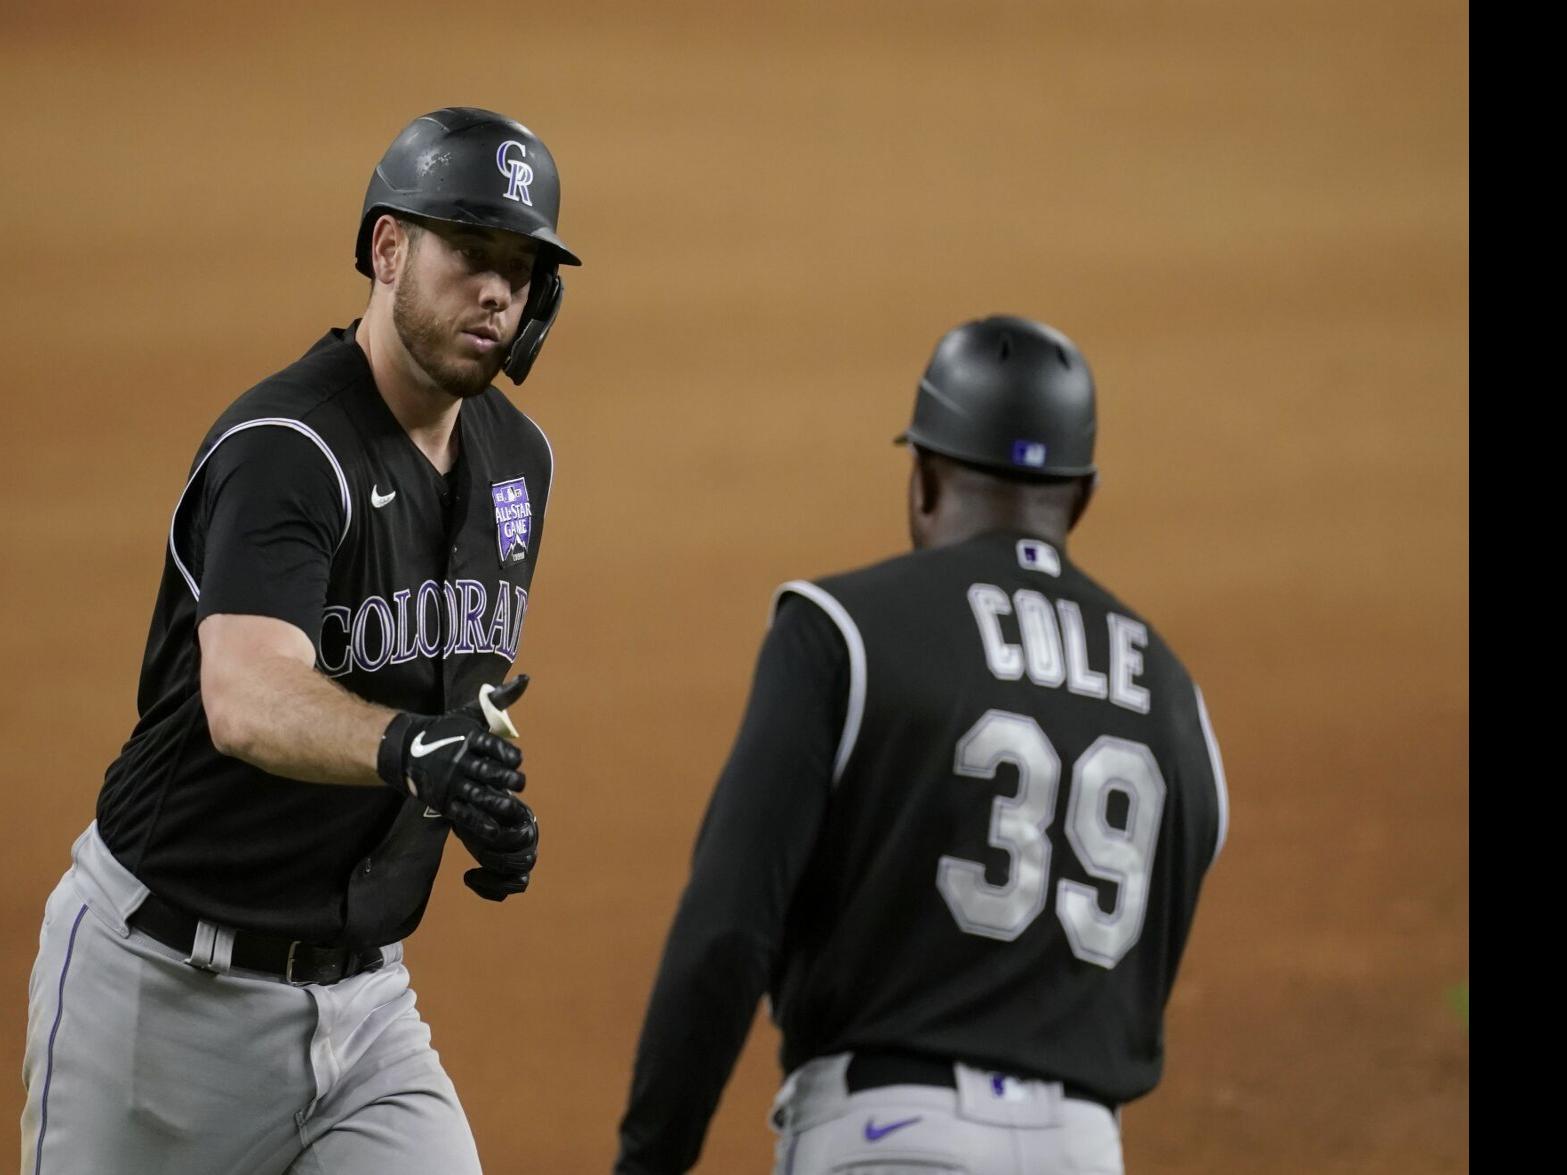 CJ Cron ends August with another home run, but Rockies fall again to  Rangers, Sports